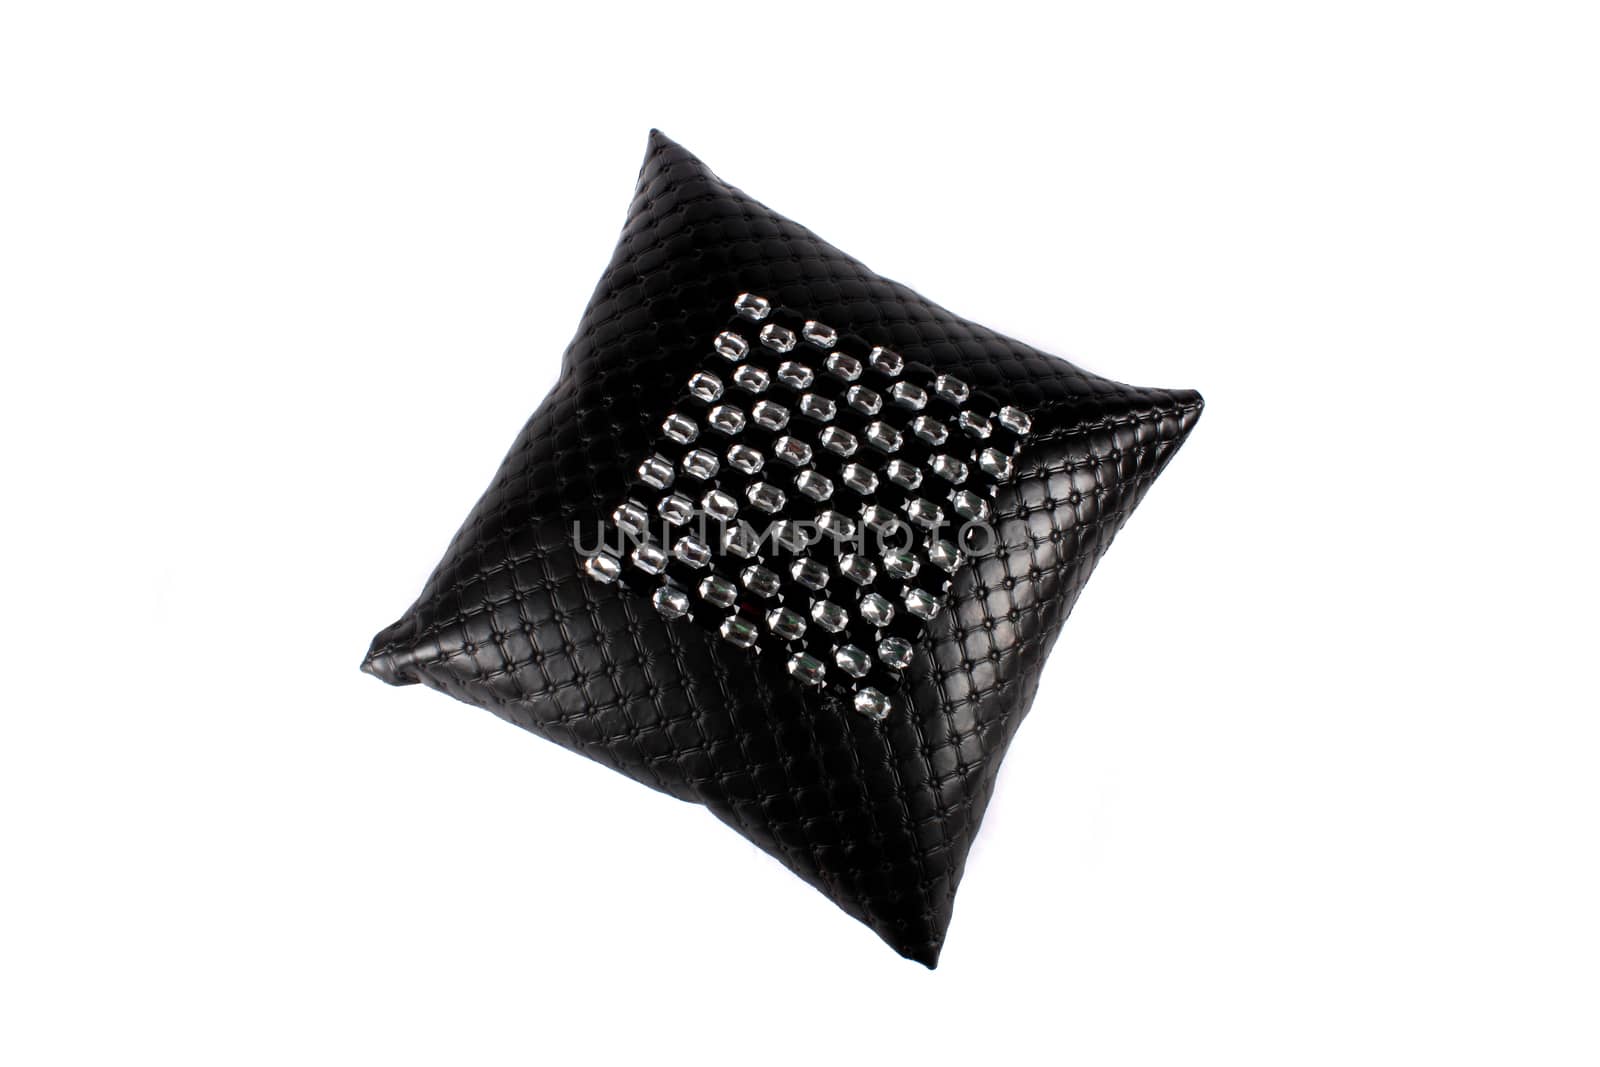 A luxurious black pillow made of leather and designed with glass beads, on white studio background